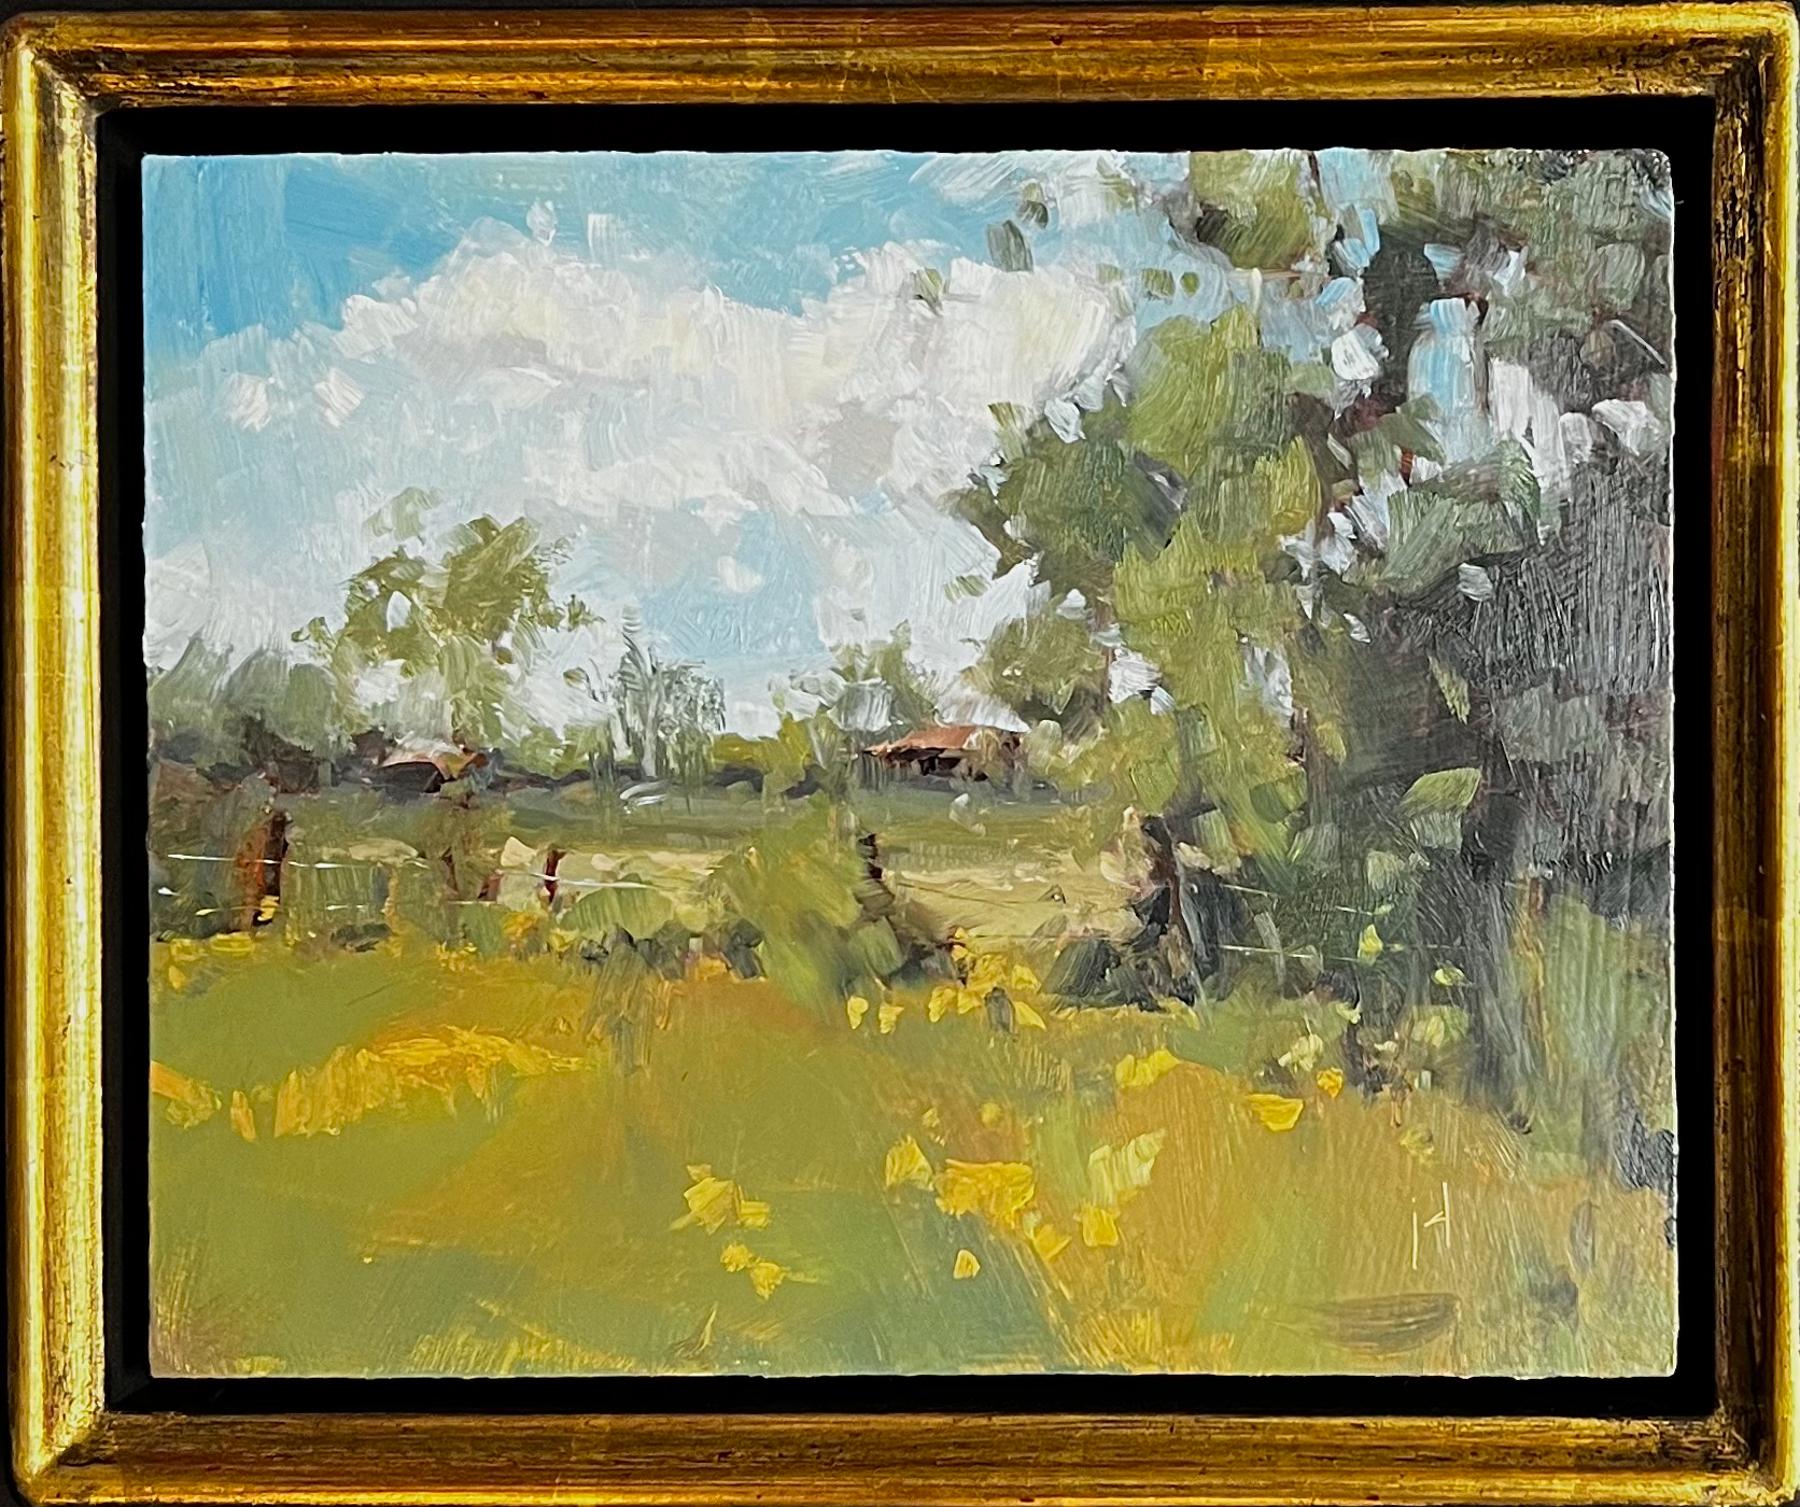 An original oil on canvas by Austin, TX based female artist Julie Davis

JULIE DAVIS
Texas Summer, 2022
Oil on Canvas
9.75 x 11.5 x .5 in
Unframed Dimensions: 8 x 10 x .25 in

Raised in the open spaces of West Texas, I remember a love of nature and